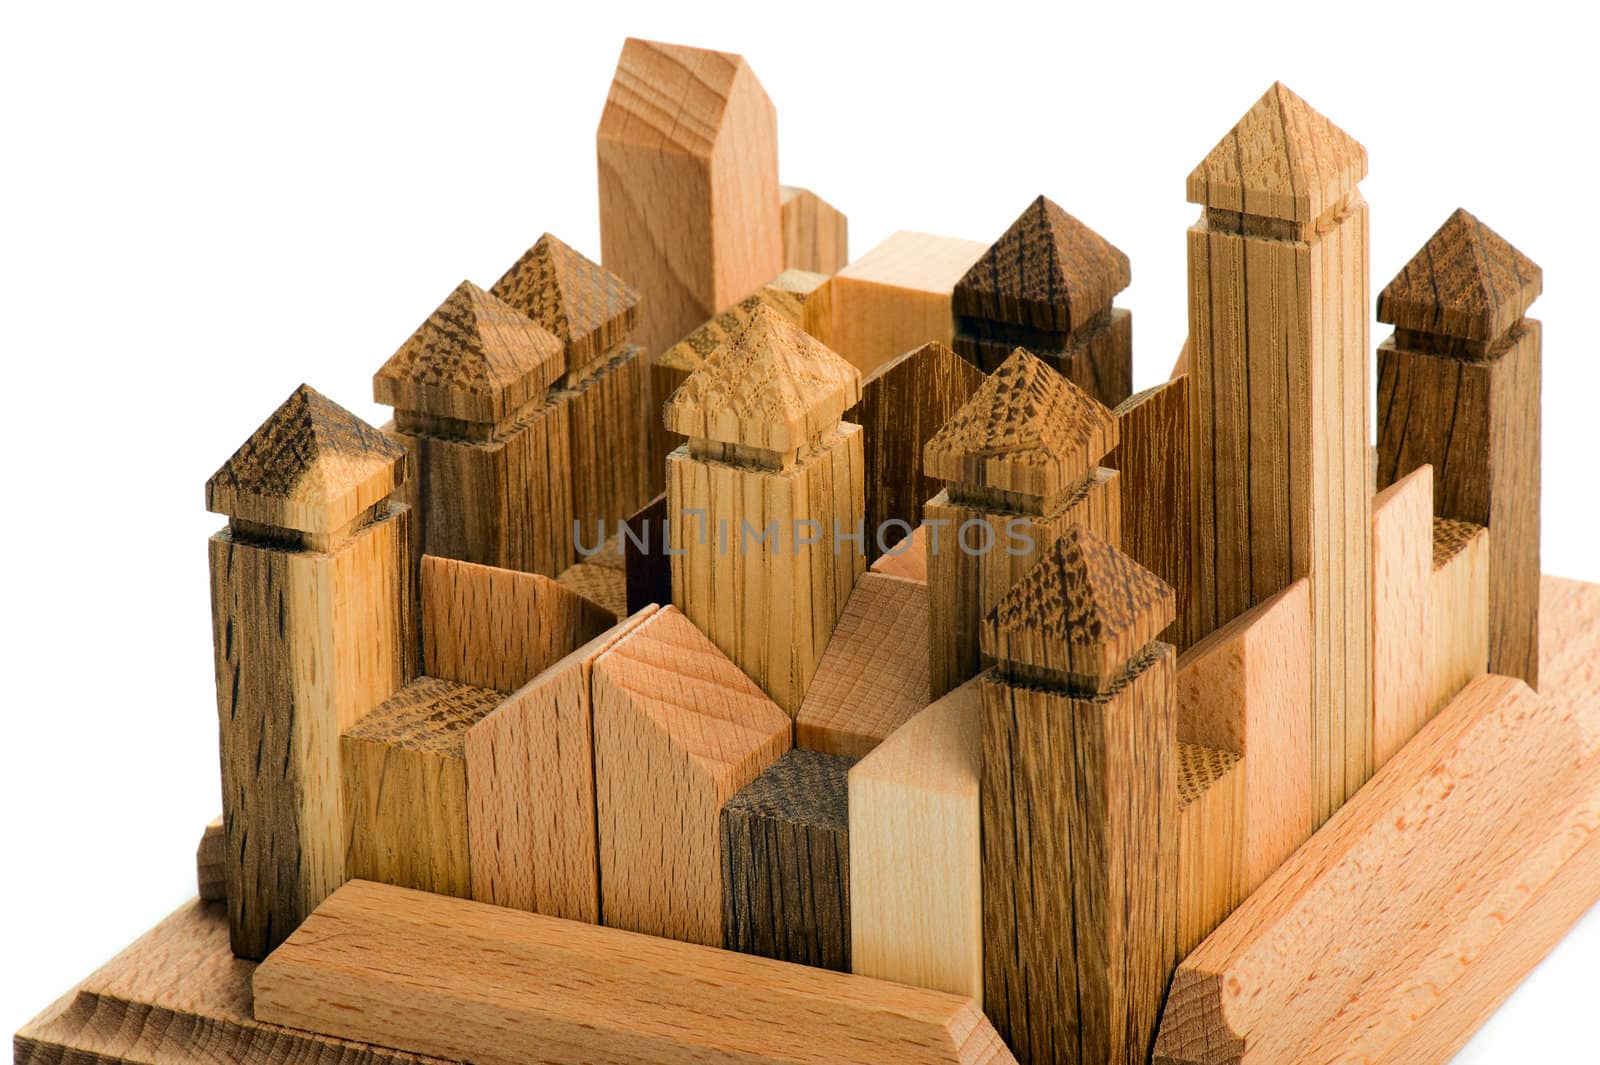 Wooden puzzle by Kamensky